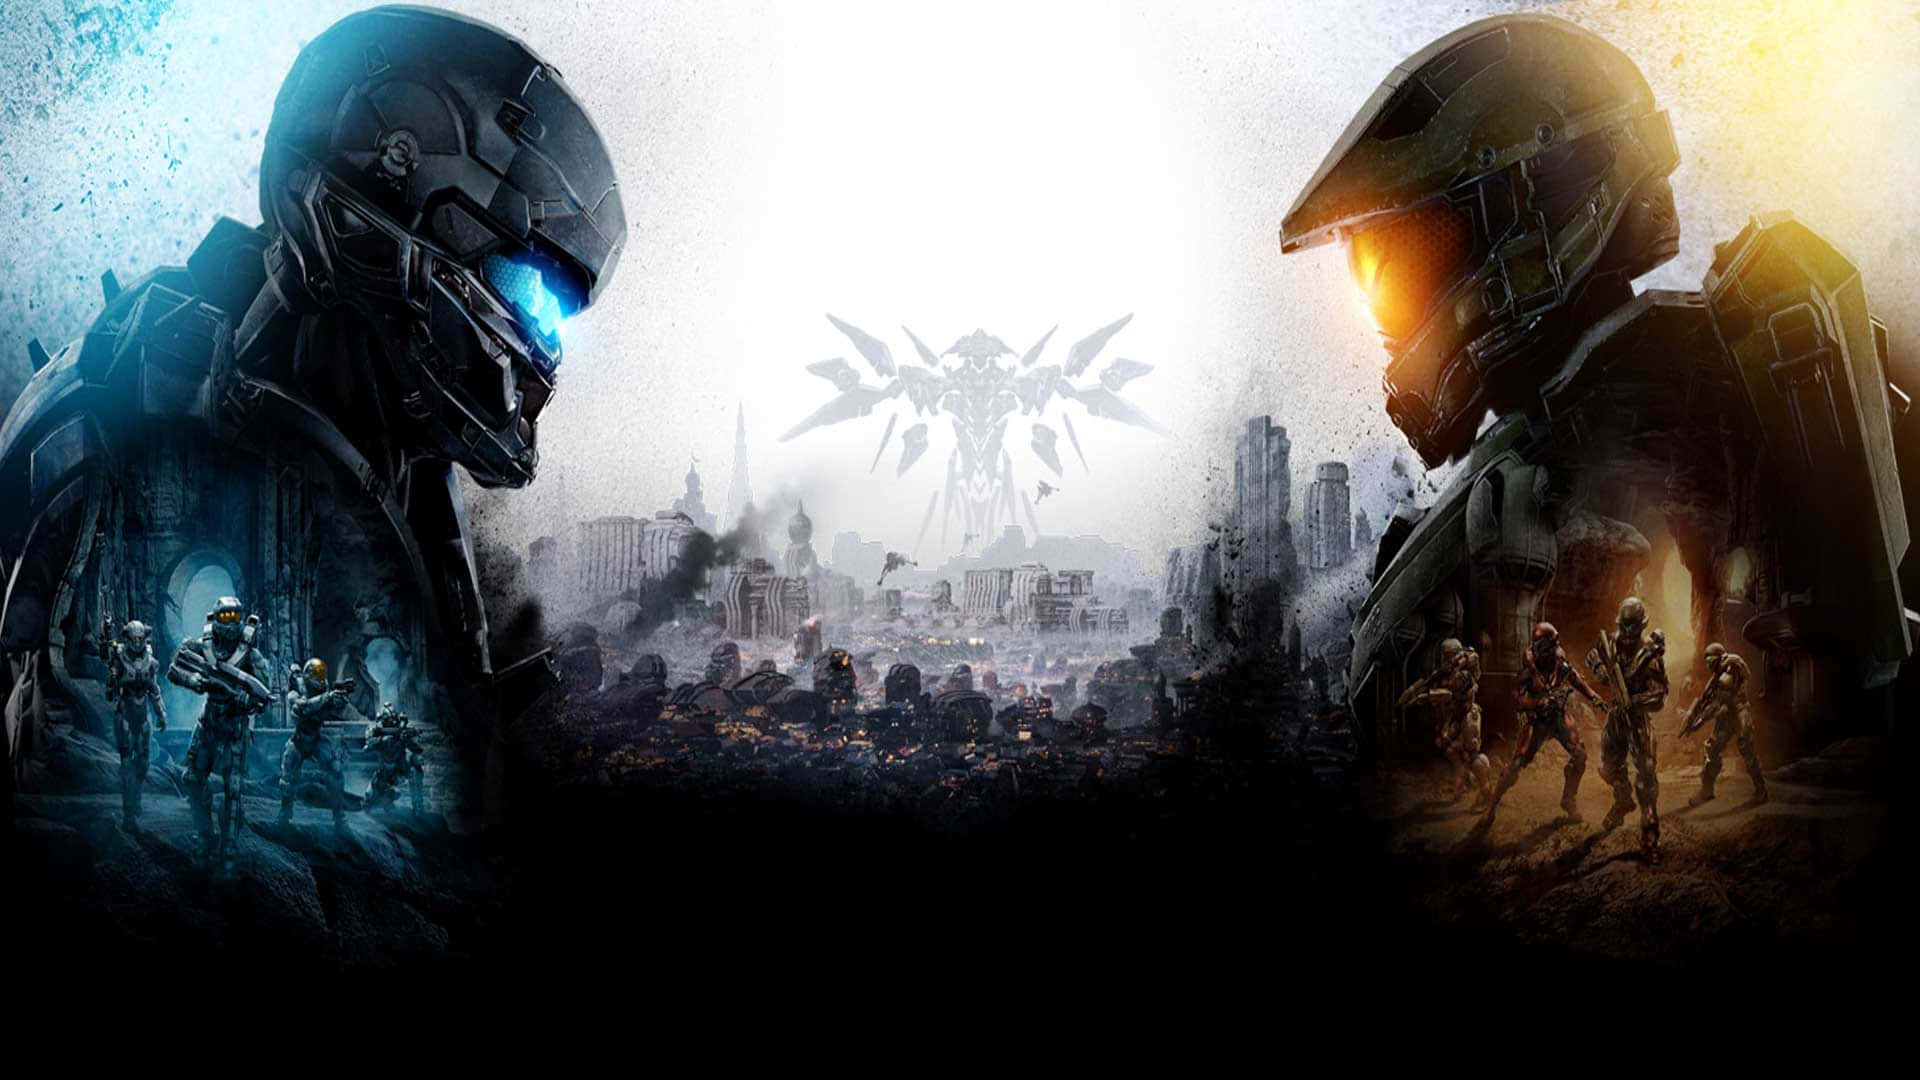 Cool Red And Blue Halo Battle Wallpaper